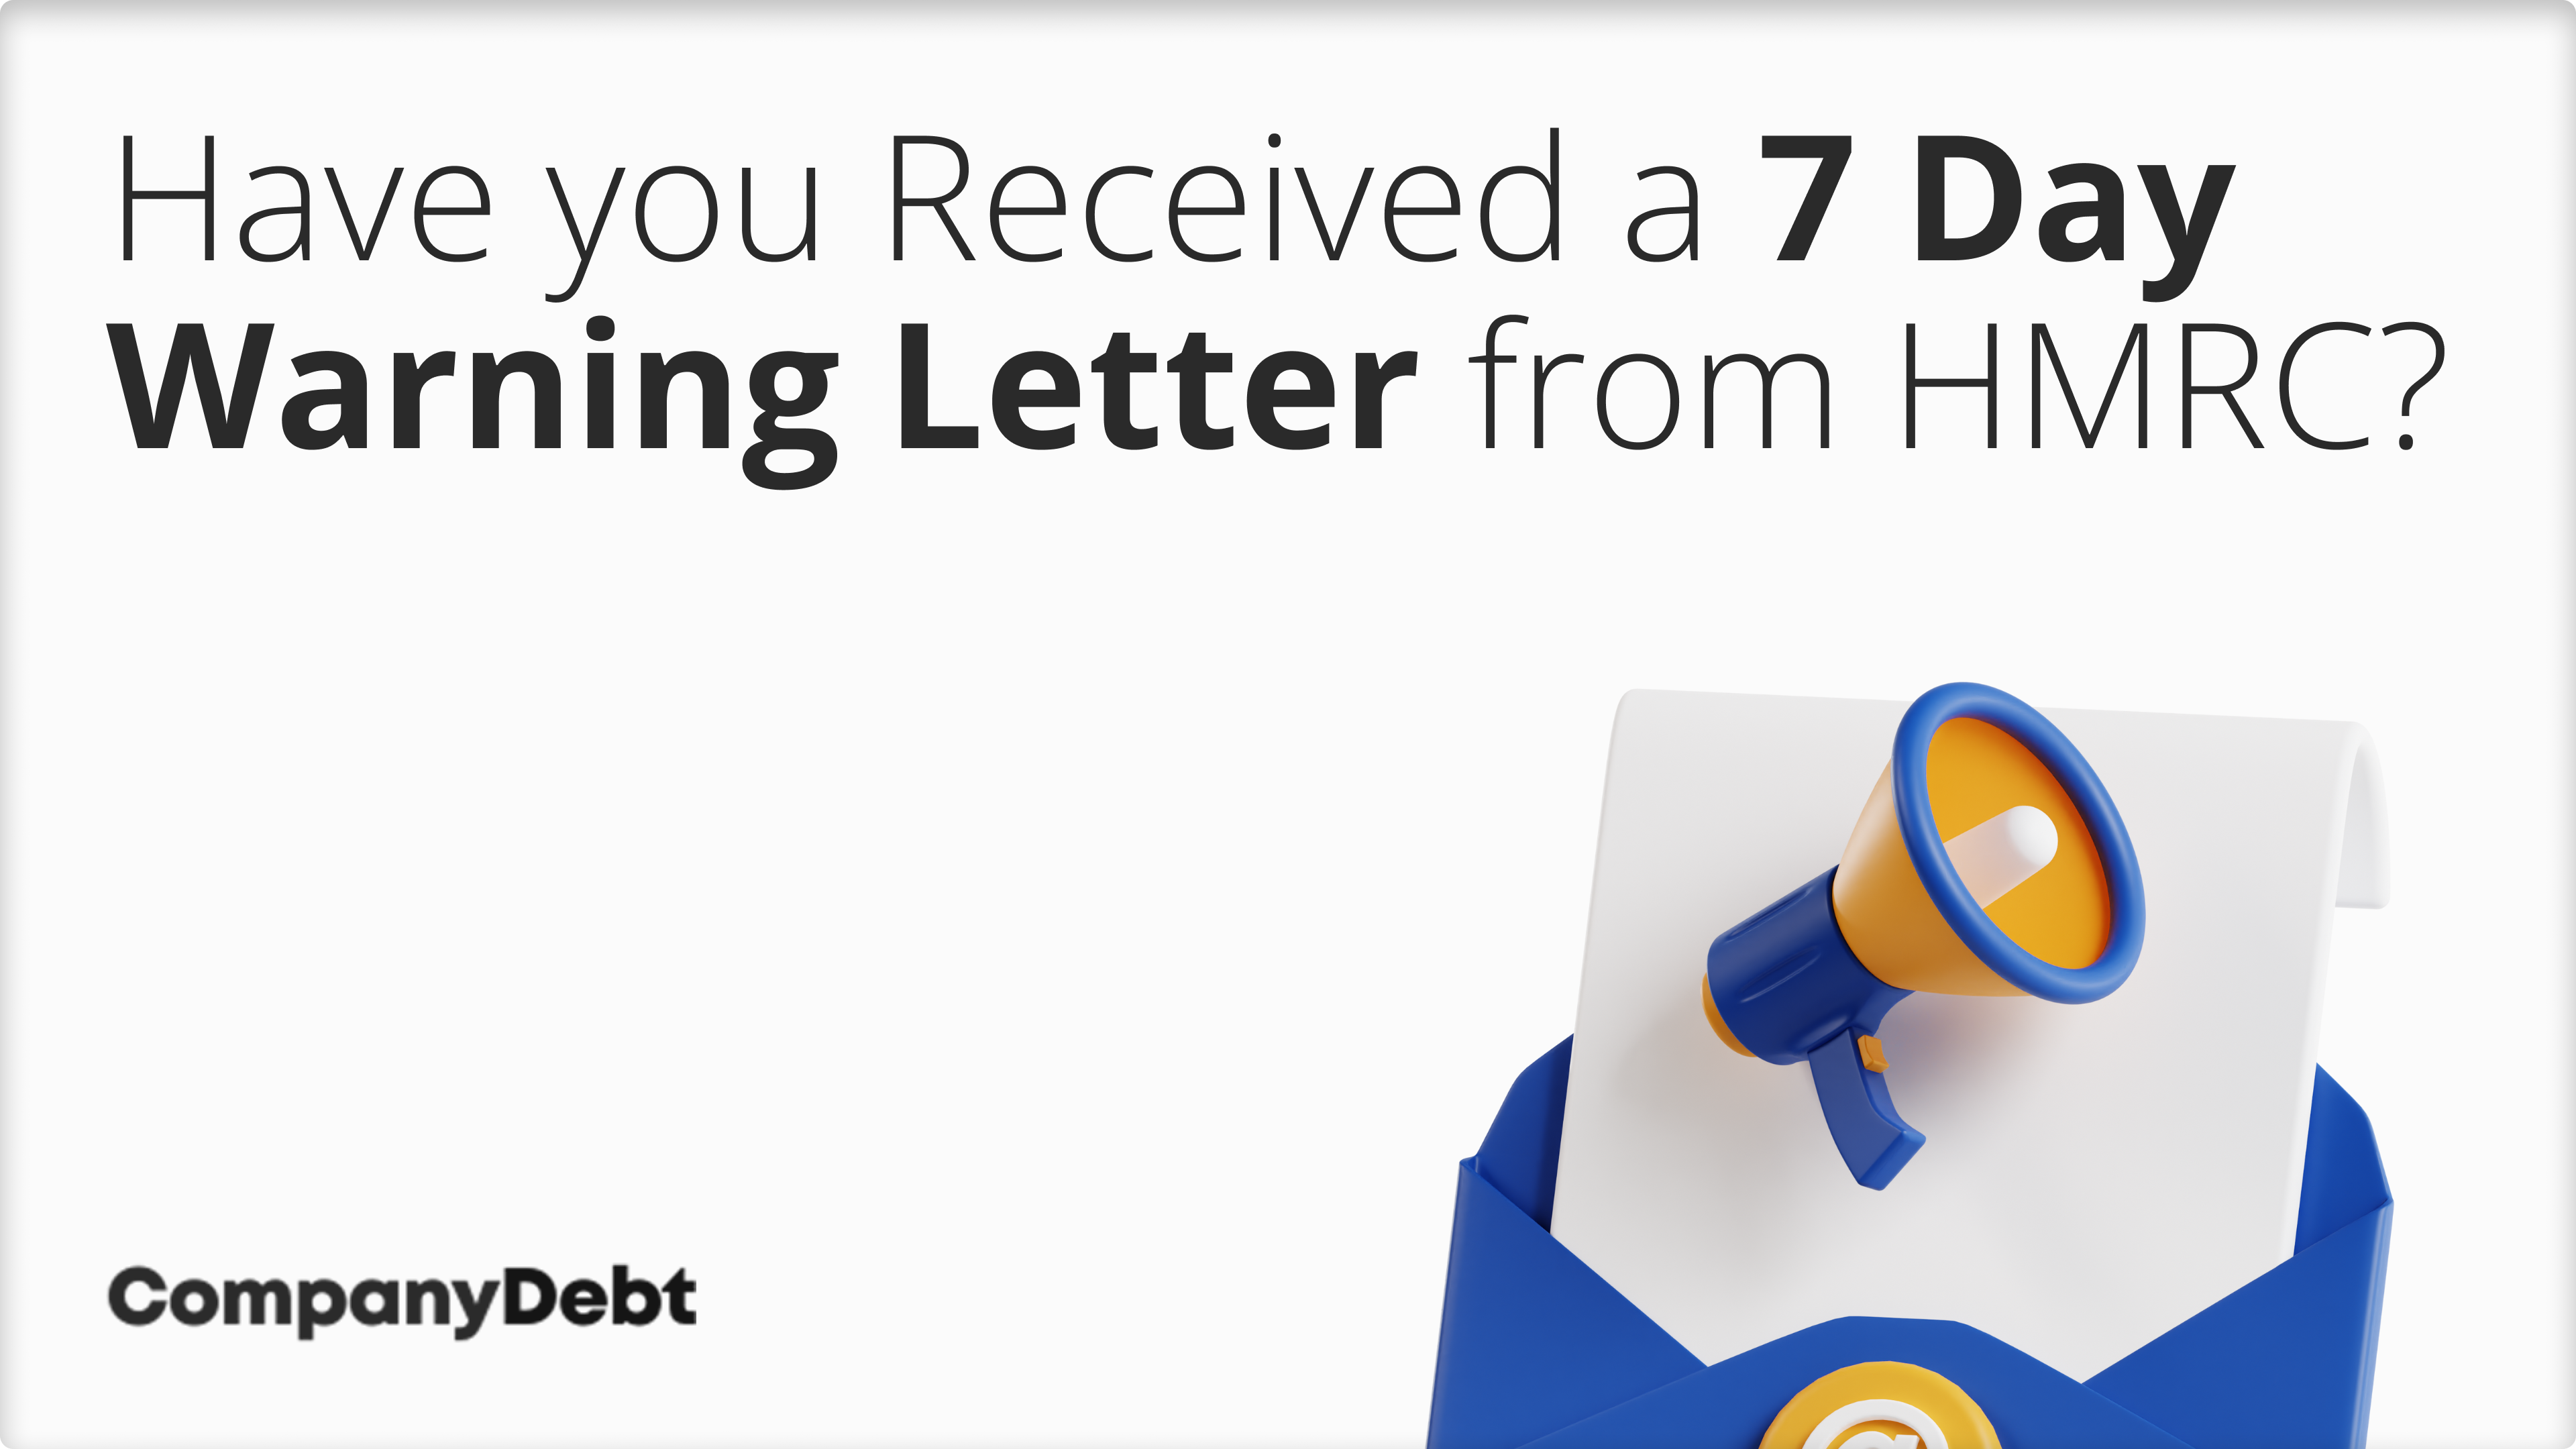 Have you Received a 7 Day Warning Letter from HMRC?